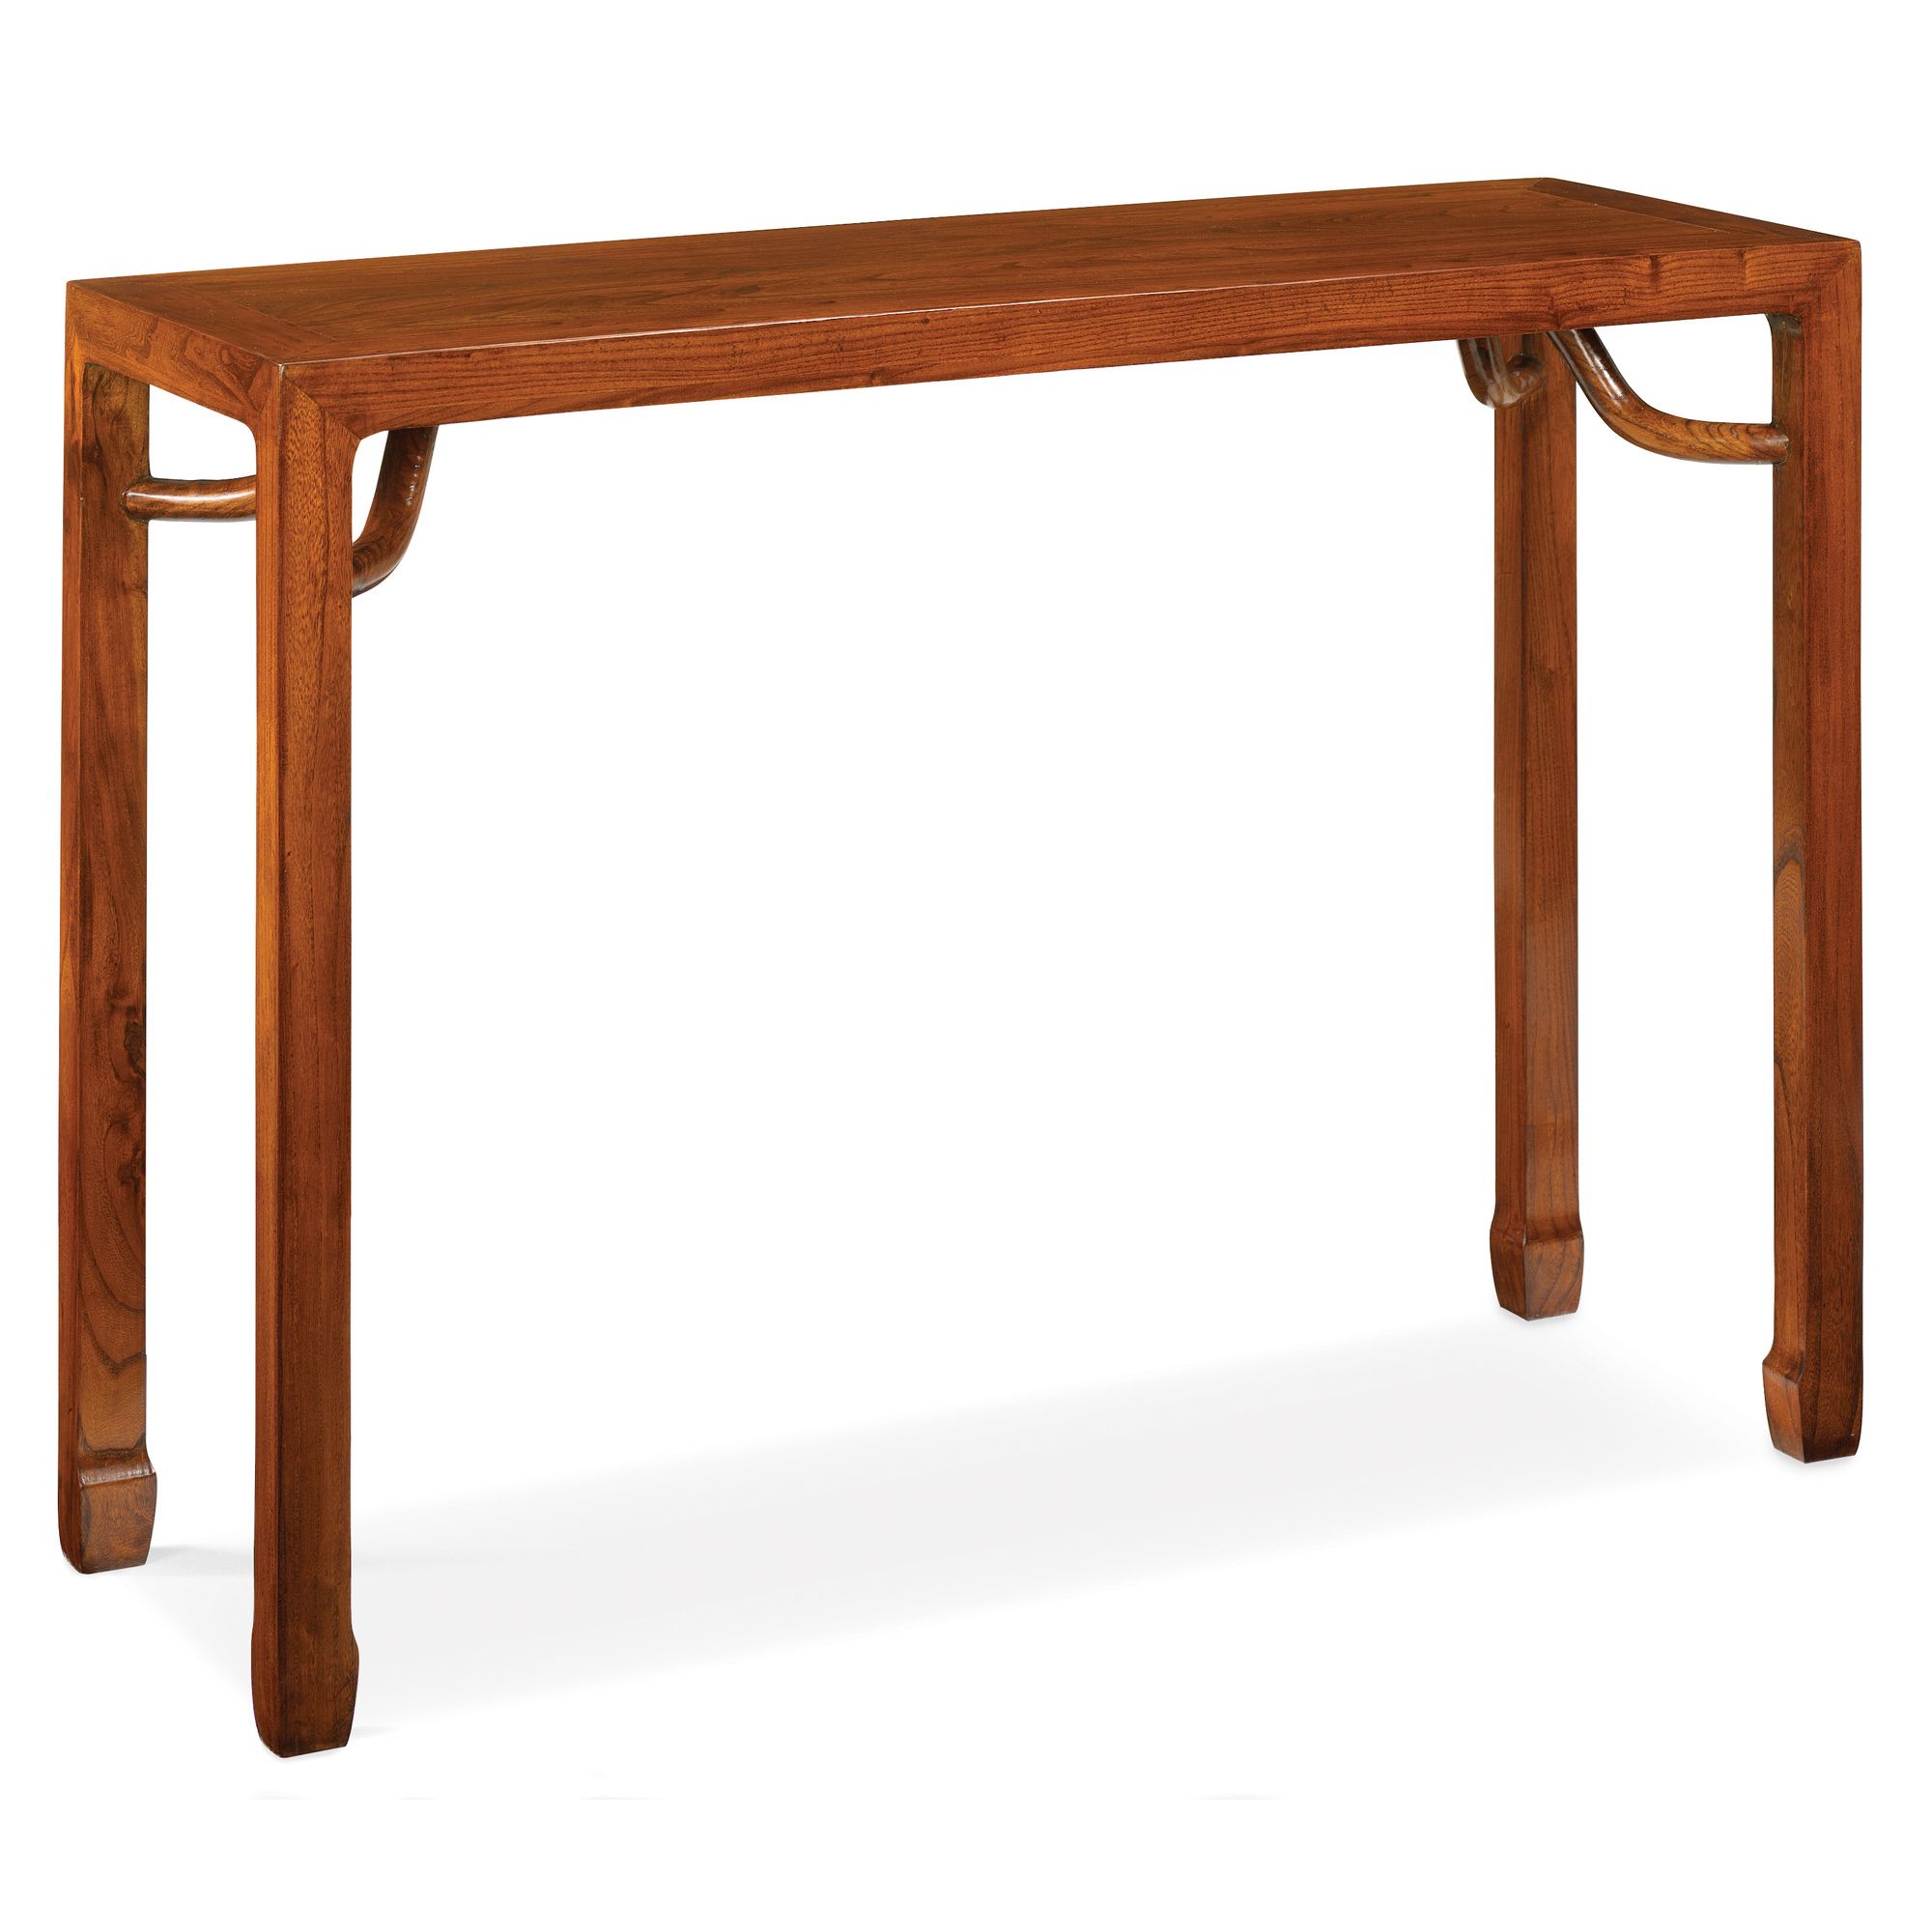 Shimu Chinese Classical Ming Console Table - Warm Elm at Tesco Direct